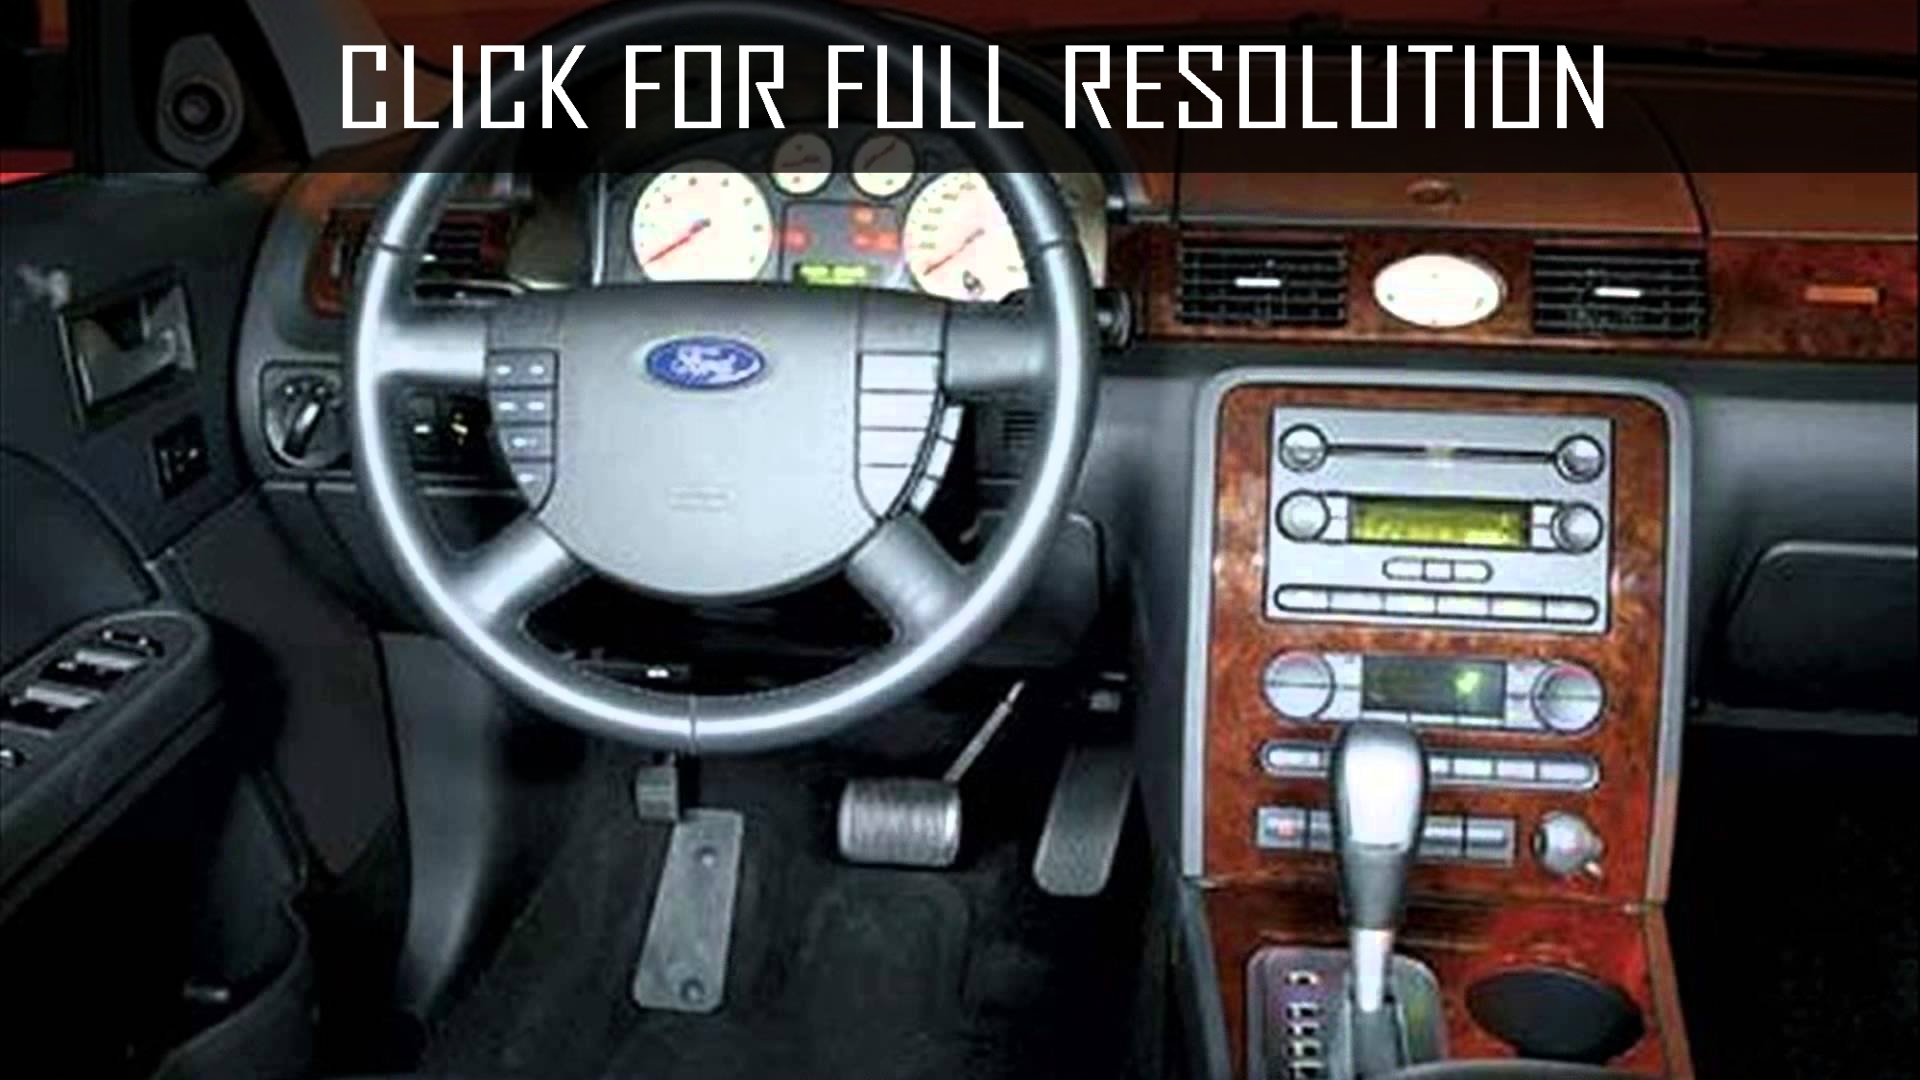 2005 Ford 500 Best Image Gallery 13 14 Share And Download